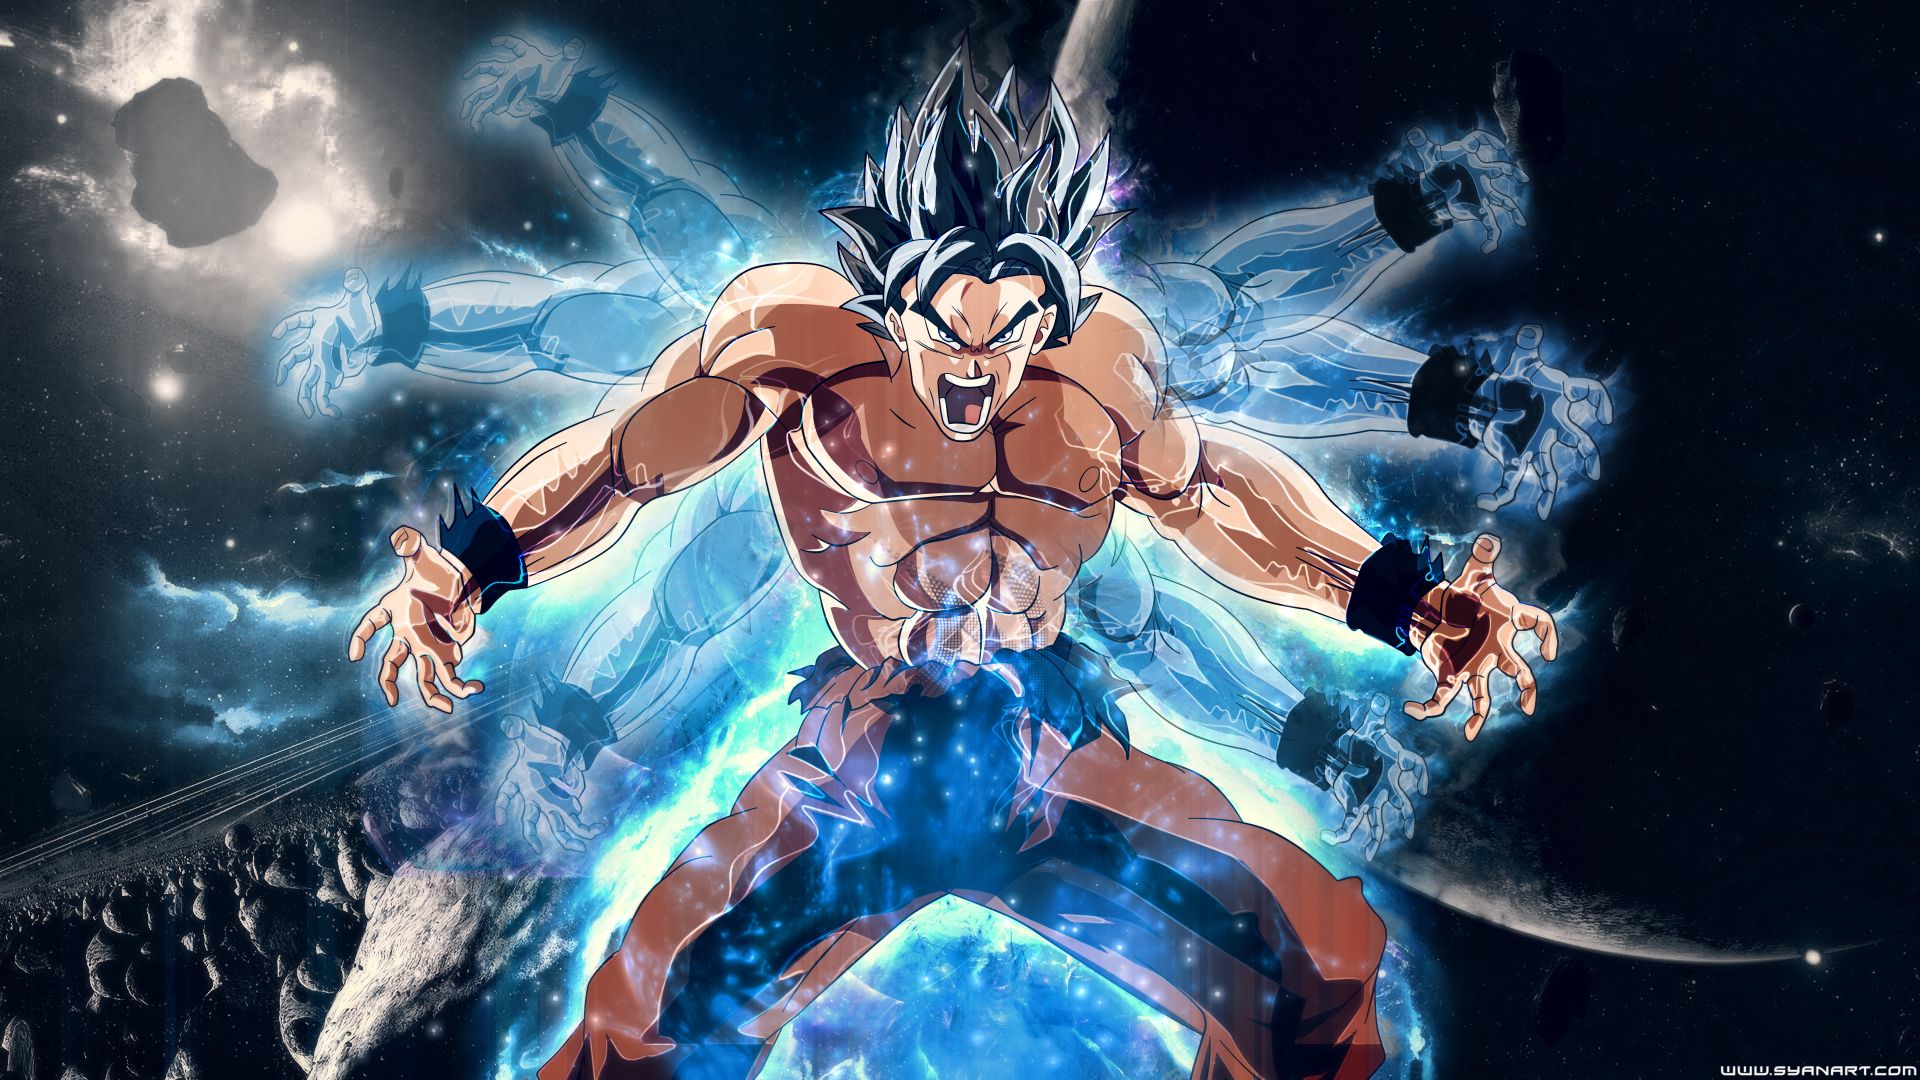 Probably my favorite character to make edits of Although he is a heroes  concept I just loved the idea of Goku soon learning from the Grand Priest  himself to sharpen UI Anyway